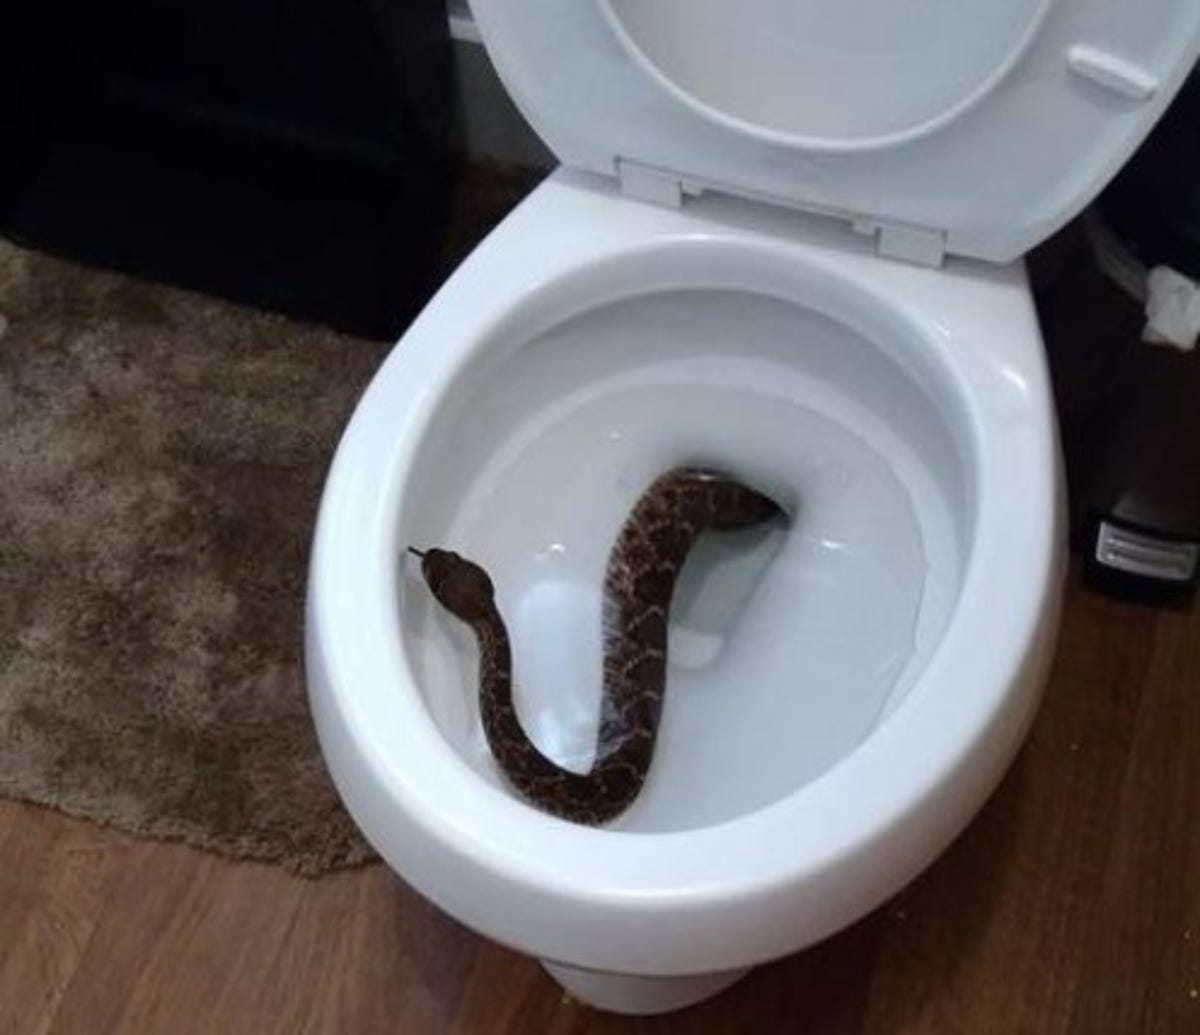 snakes found in toilets